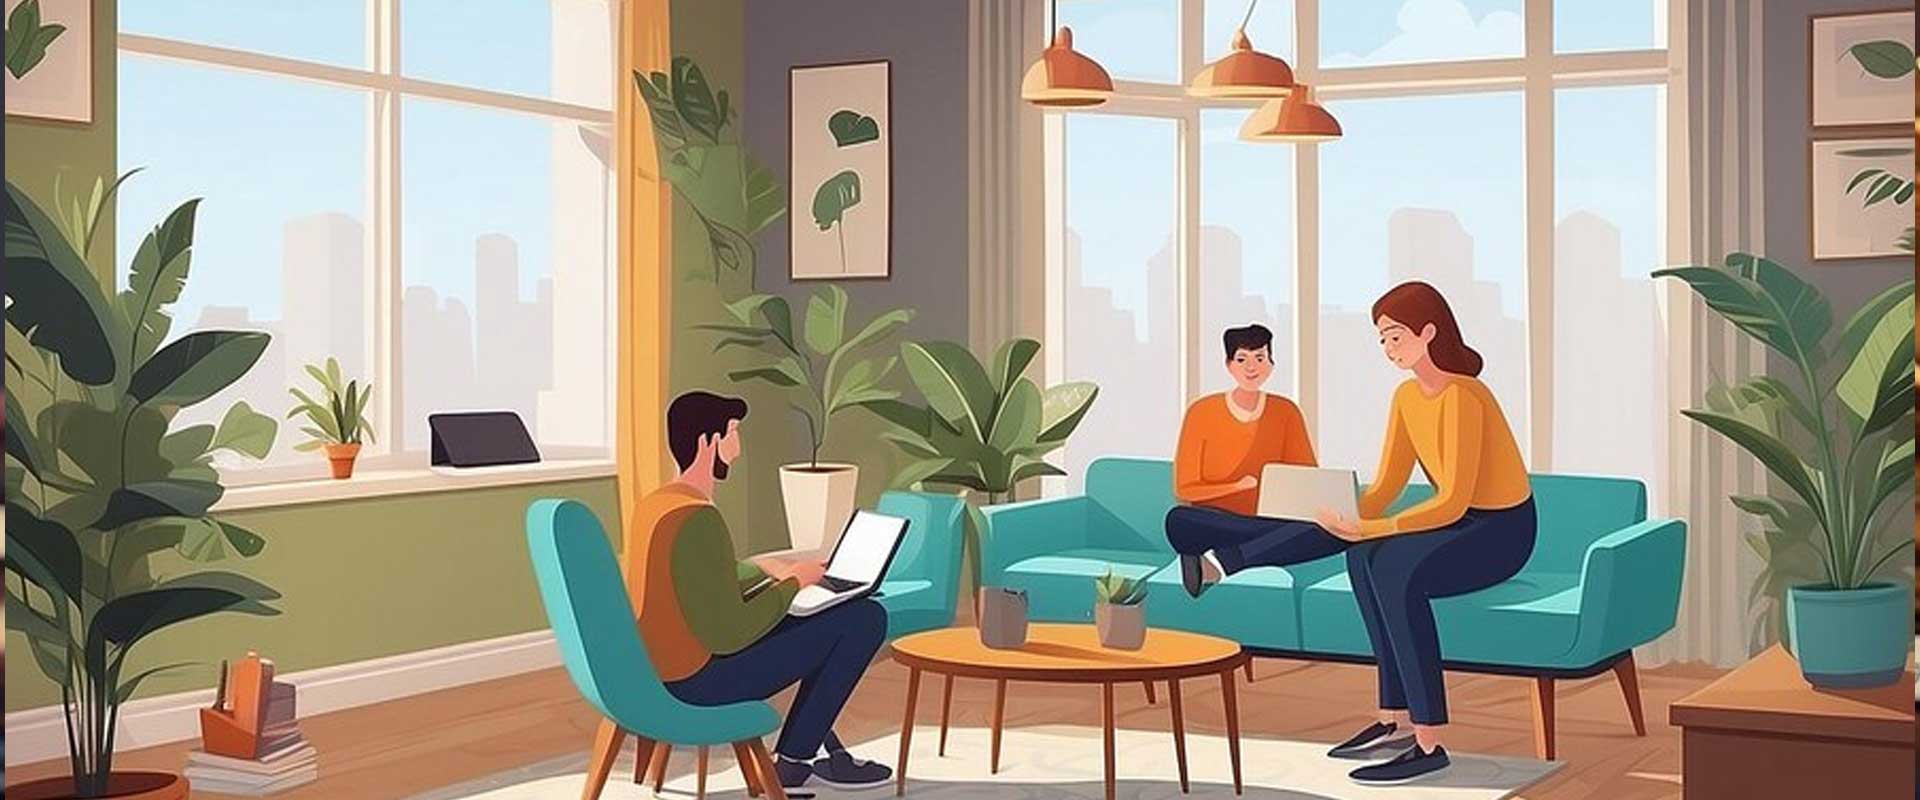 The Rise of Co-Living Spaces: Exploring Shared Housing Options and Their Popularity